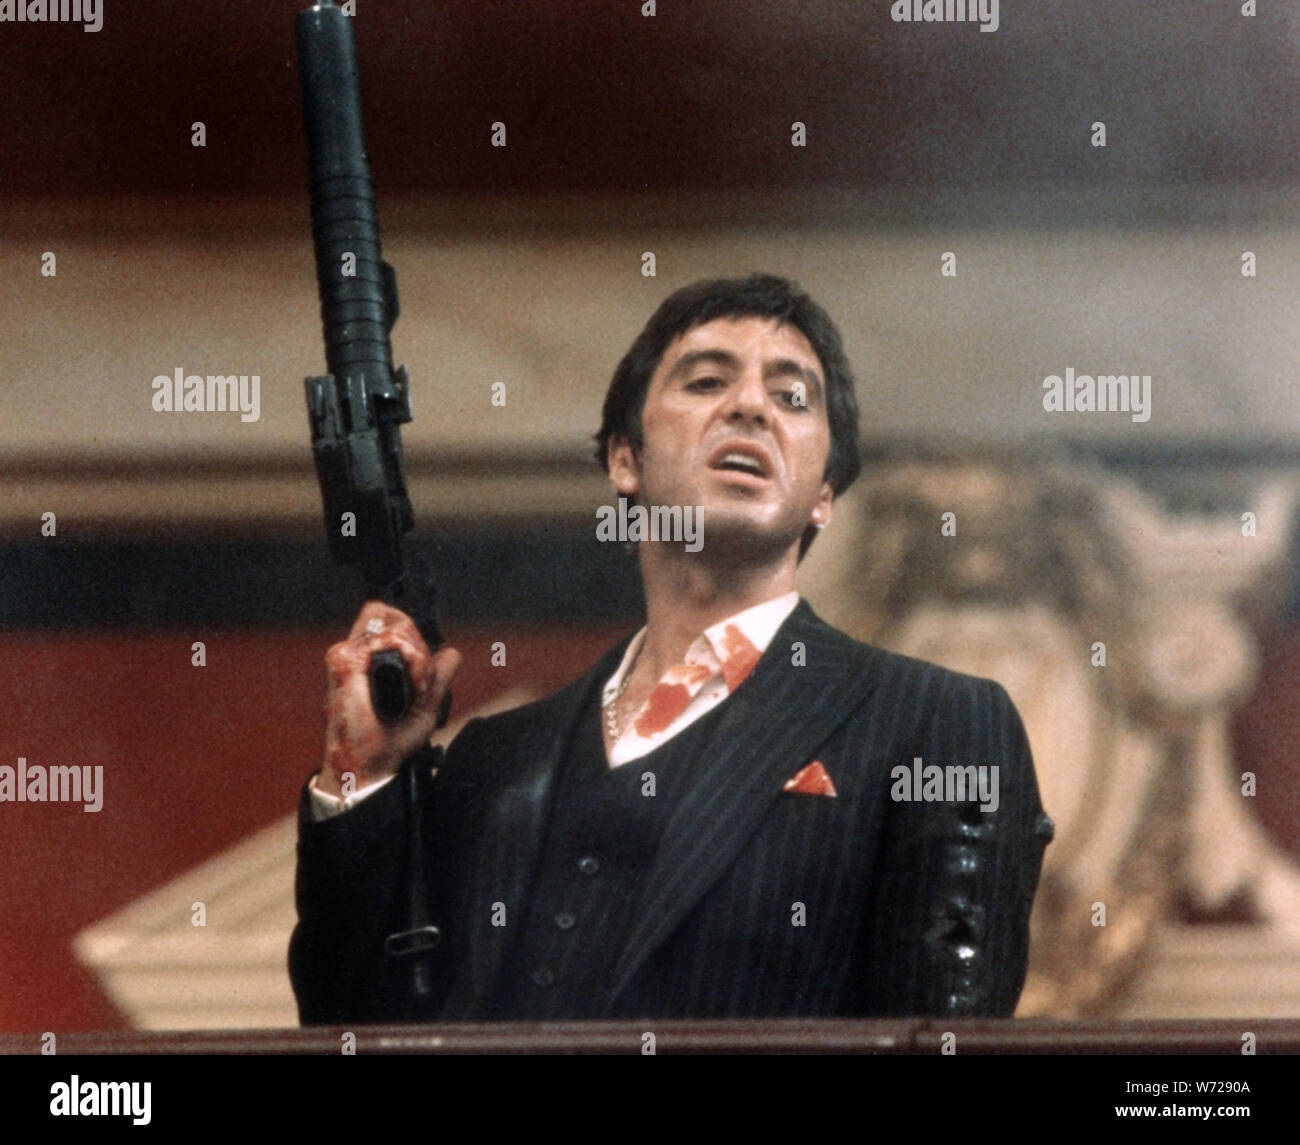 AL PACINO in SCARFACE (1983), directed by BRIAN DE PALMA. Credit: UNIVERSAL PICTURES / Album Stock Photo